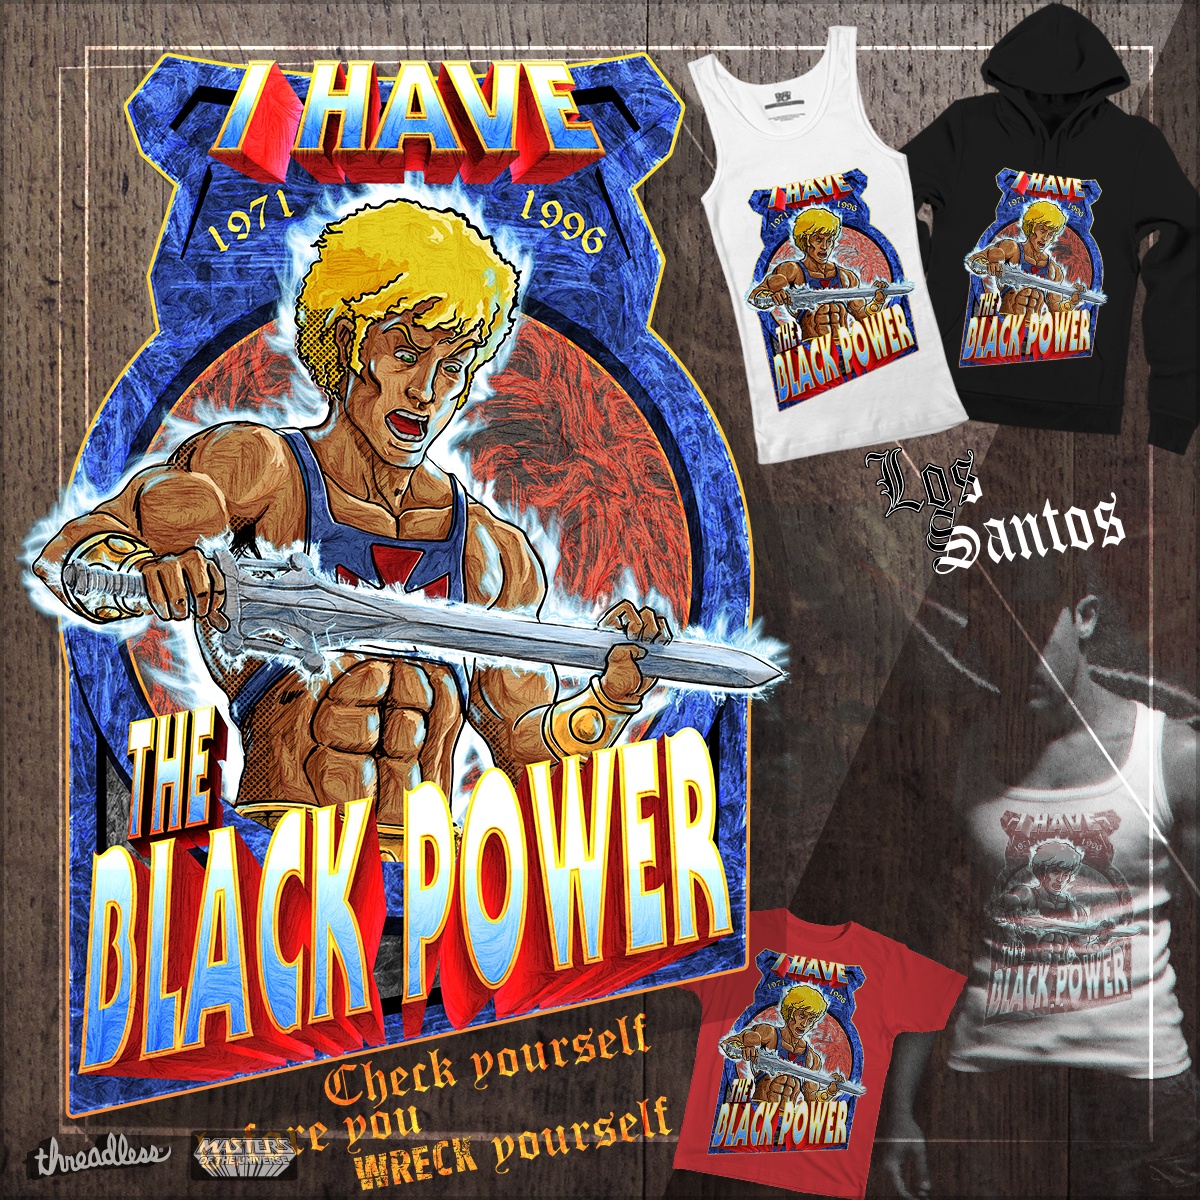 I have the Black Power!, a cool t-shirt design